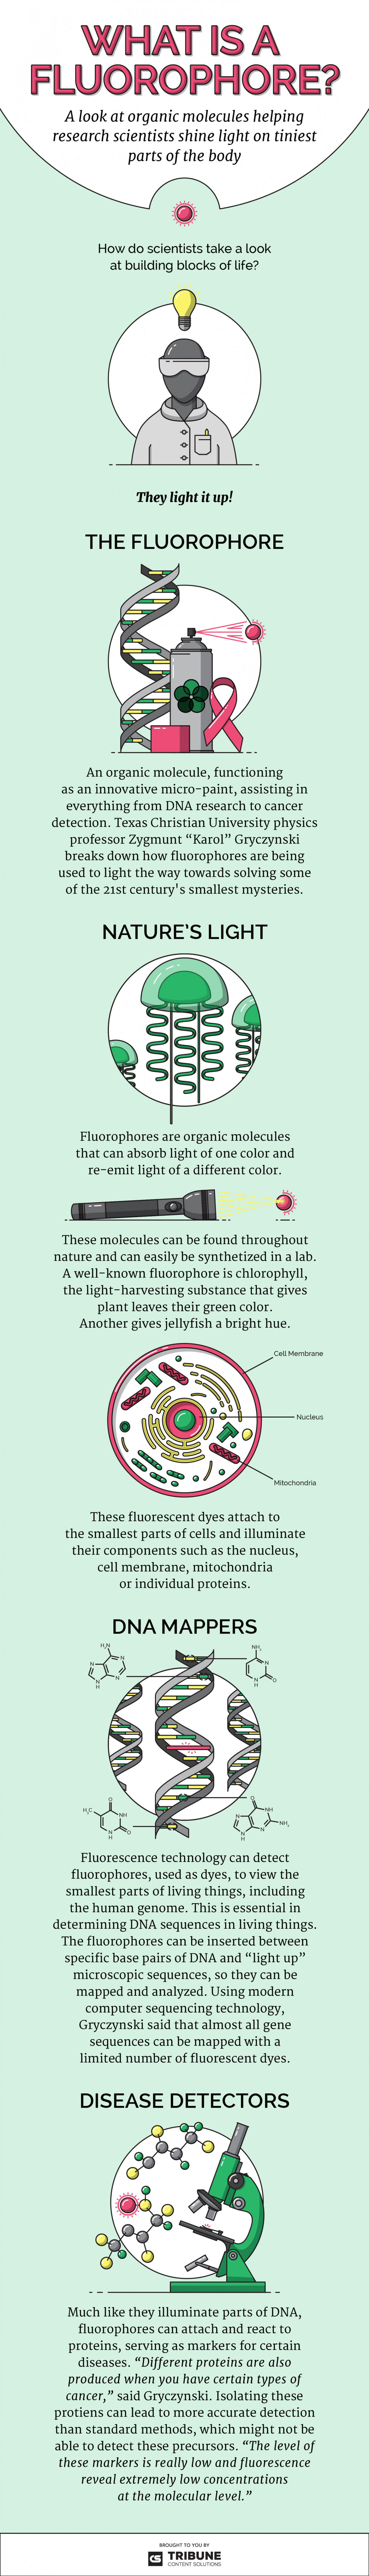 What is a Fluorophore Infographic